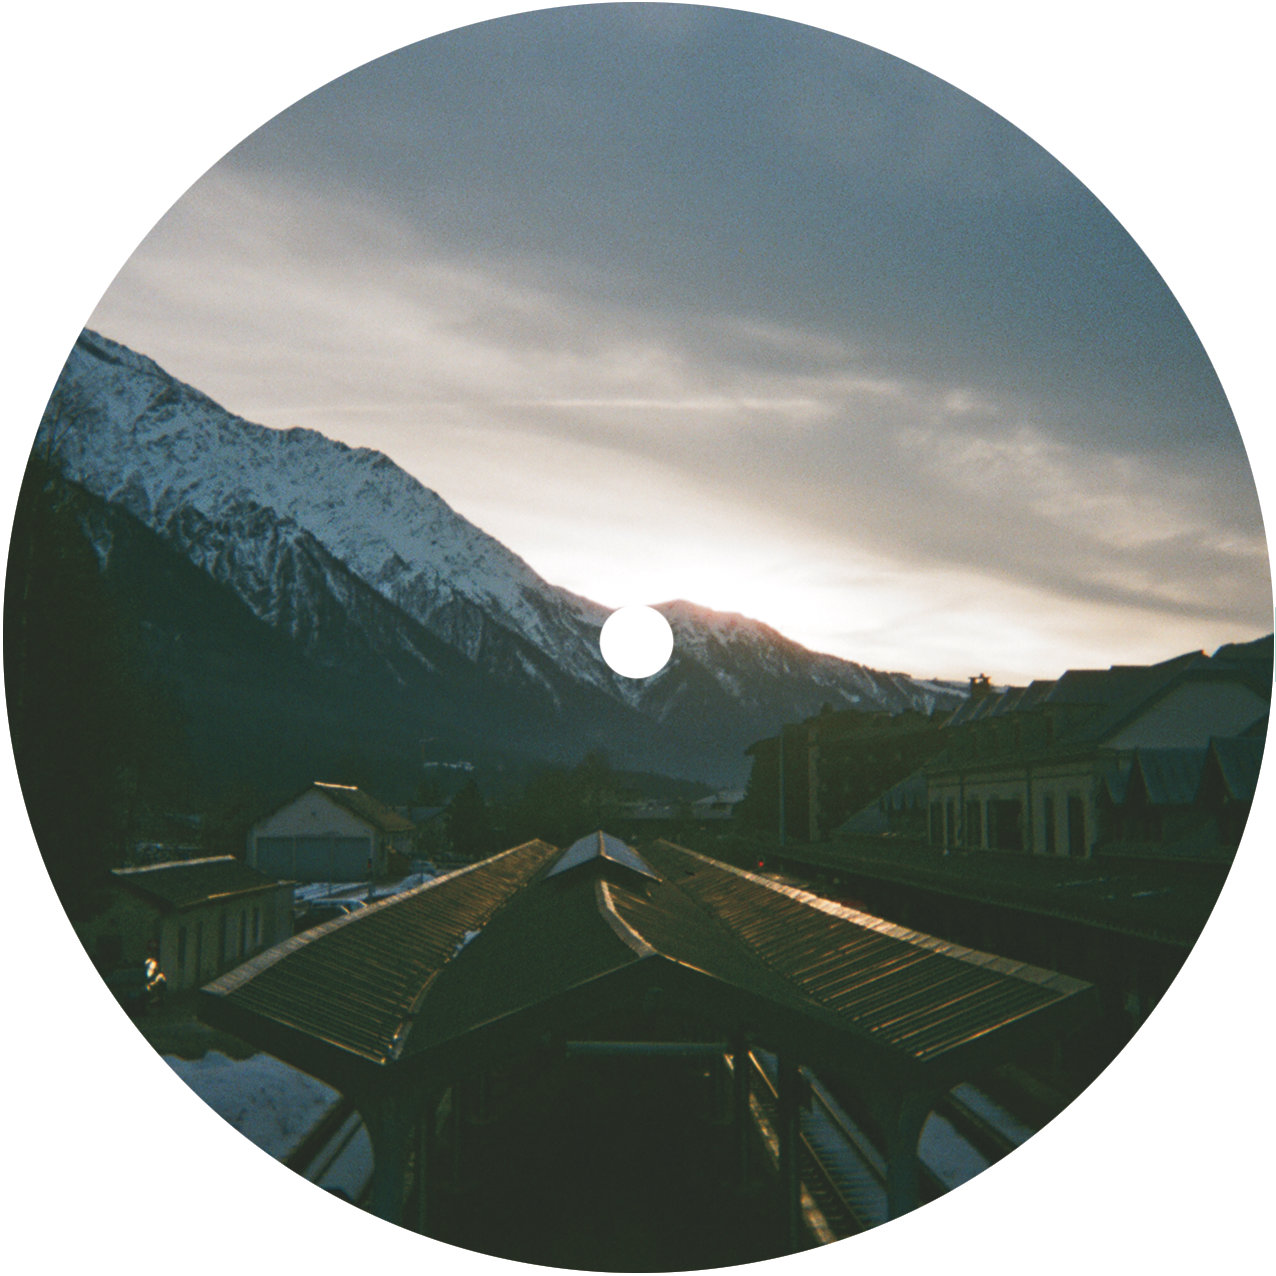 K15 & SMBD/EARTH STATE EP 12"